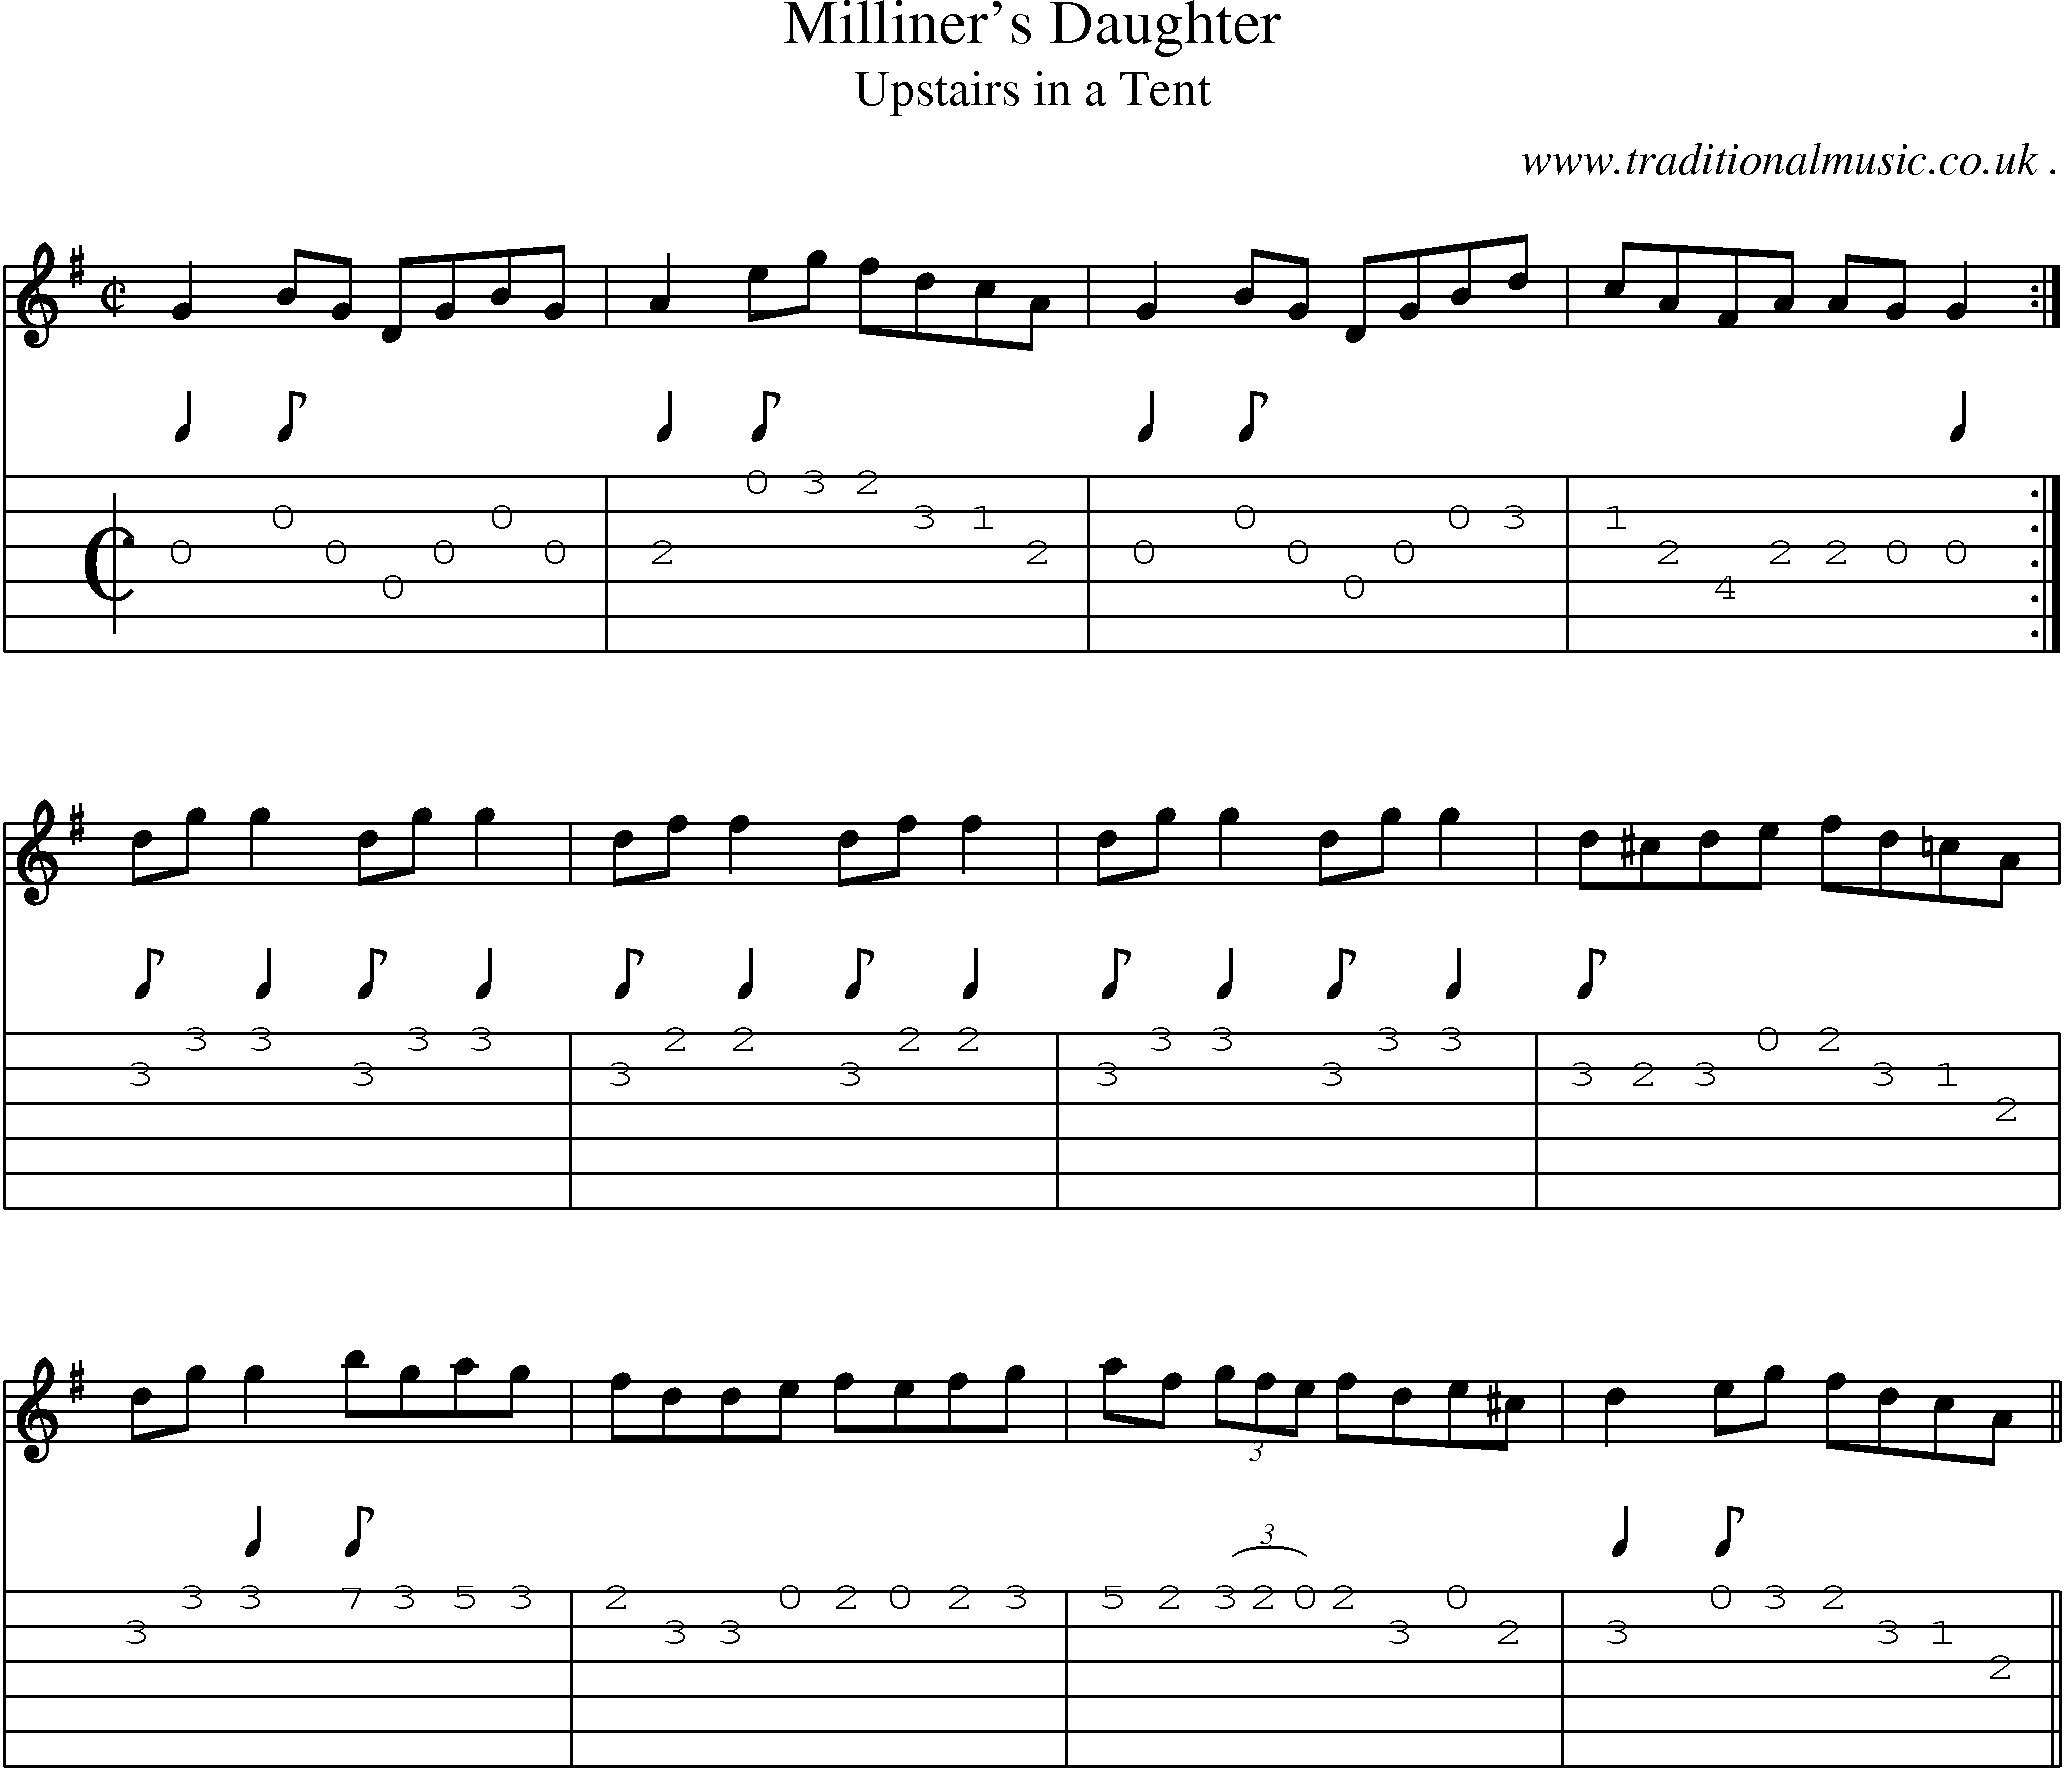 Sheet-Music and Guitar Tabs for Milliners Daughter